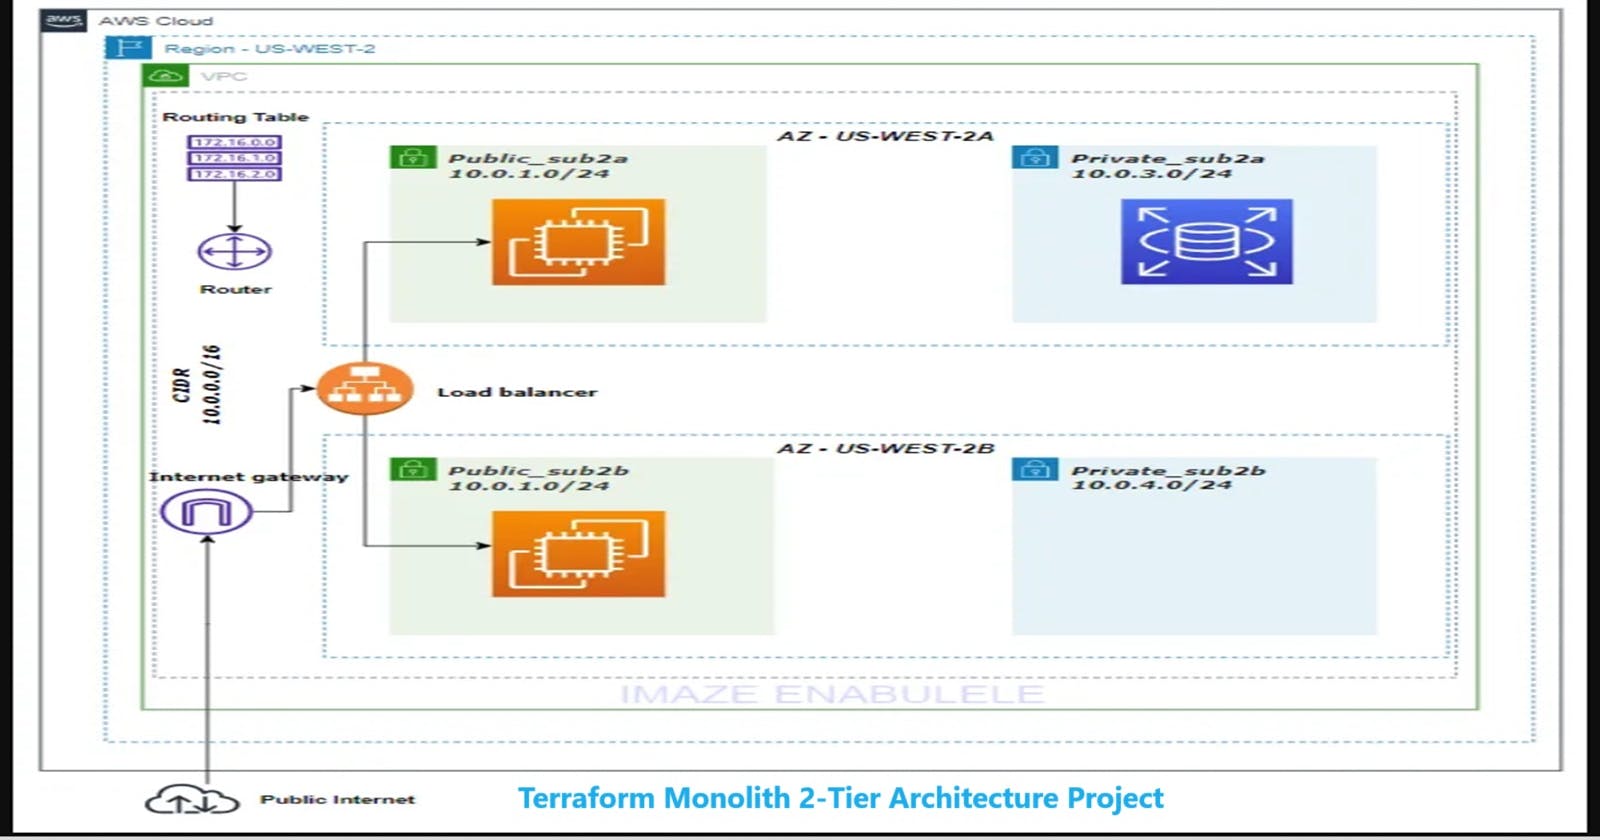 Deploying  a 2-tier Monolithic architecture on AWS using Terraform